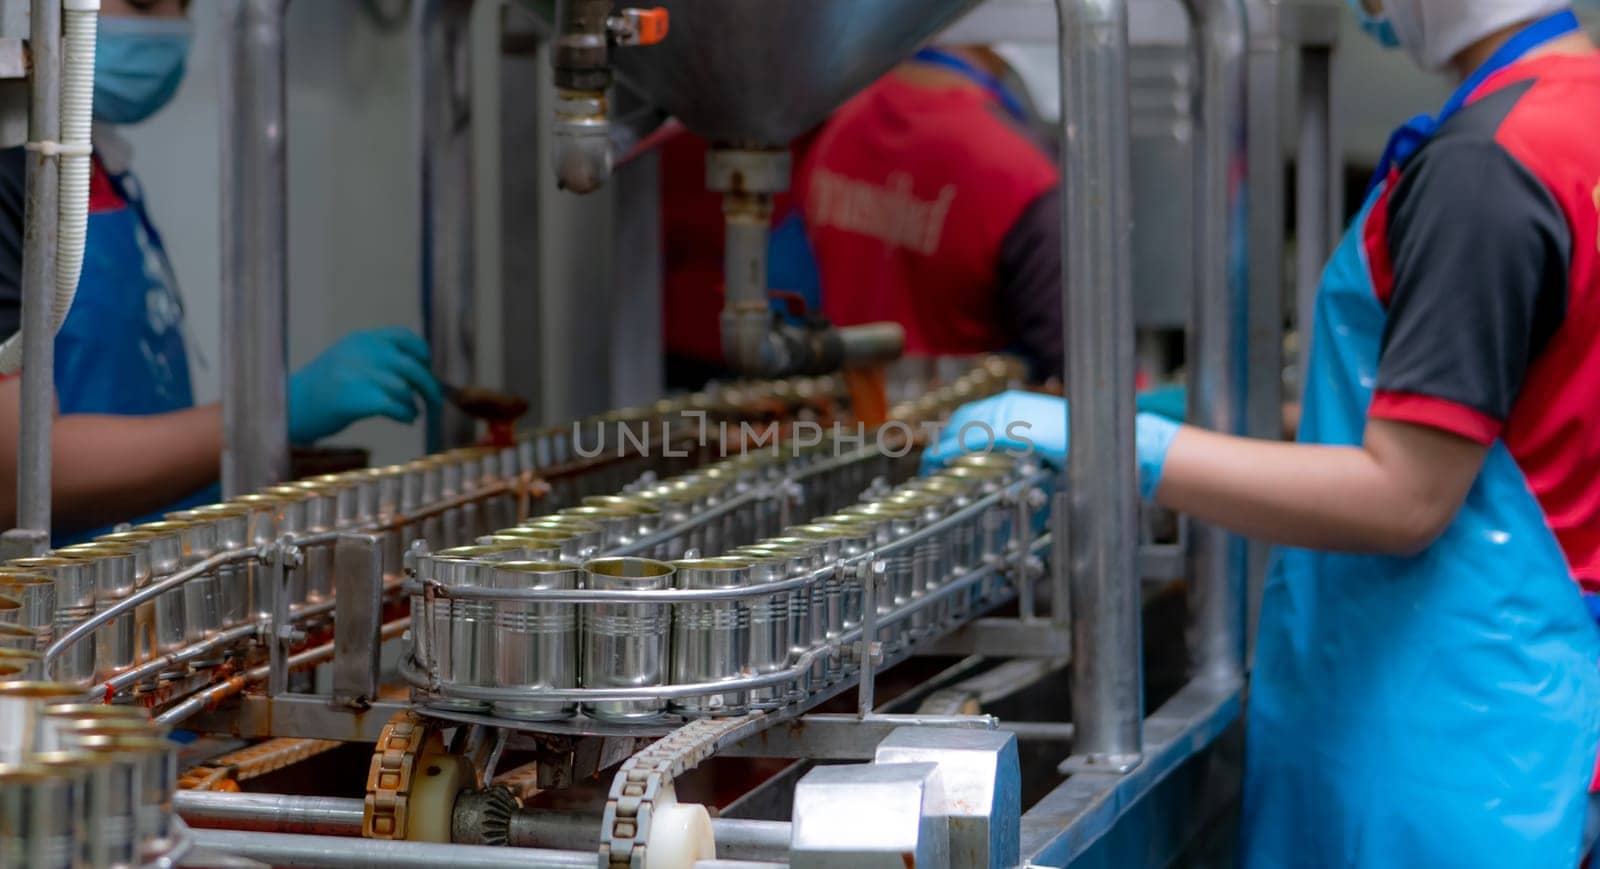 Canned fish factory. Food industry.  Sardines in red tomato sauce in tinned cans on conveyor belt at food factory. Blur workers working in food processing production line. Food manufacturing industry. by Fahroni